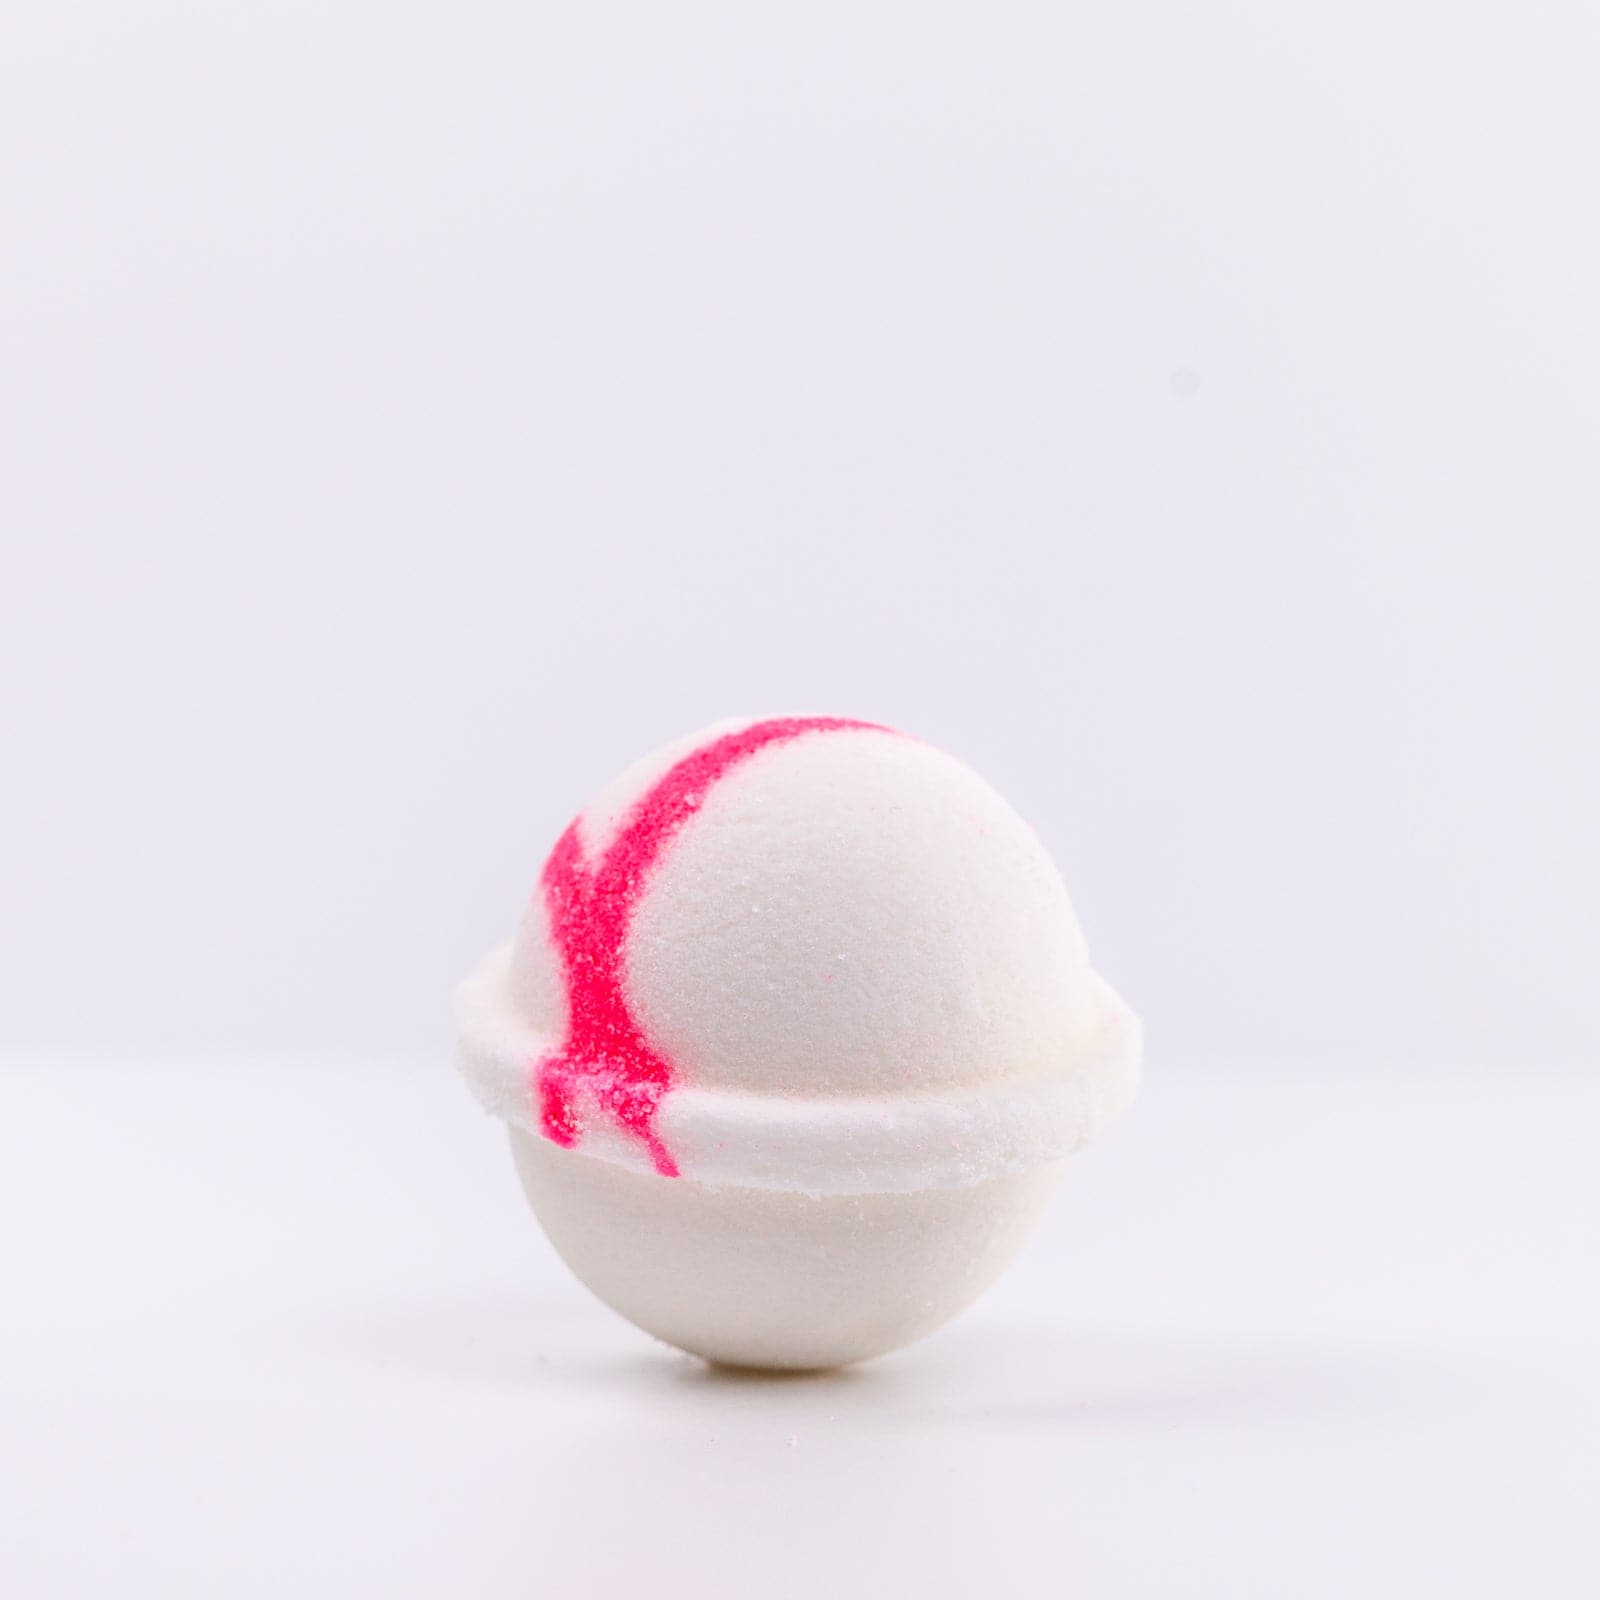 one white Mermaid Bath Bomb with pink "X" design on left side of bath bomb